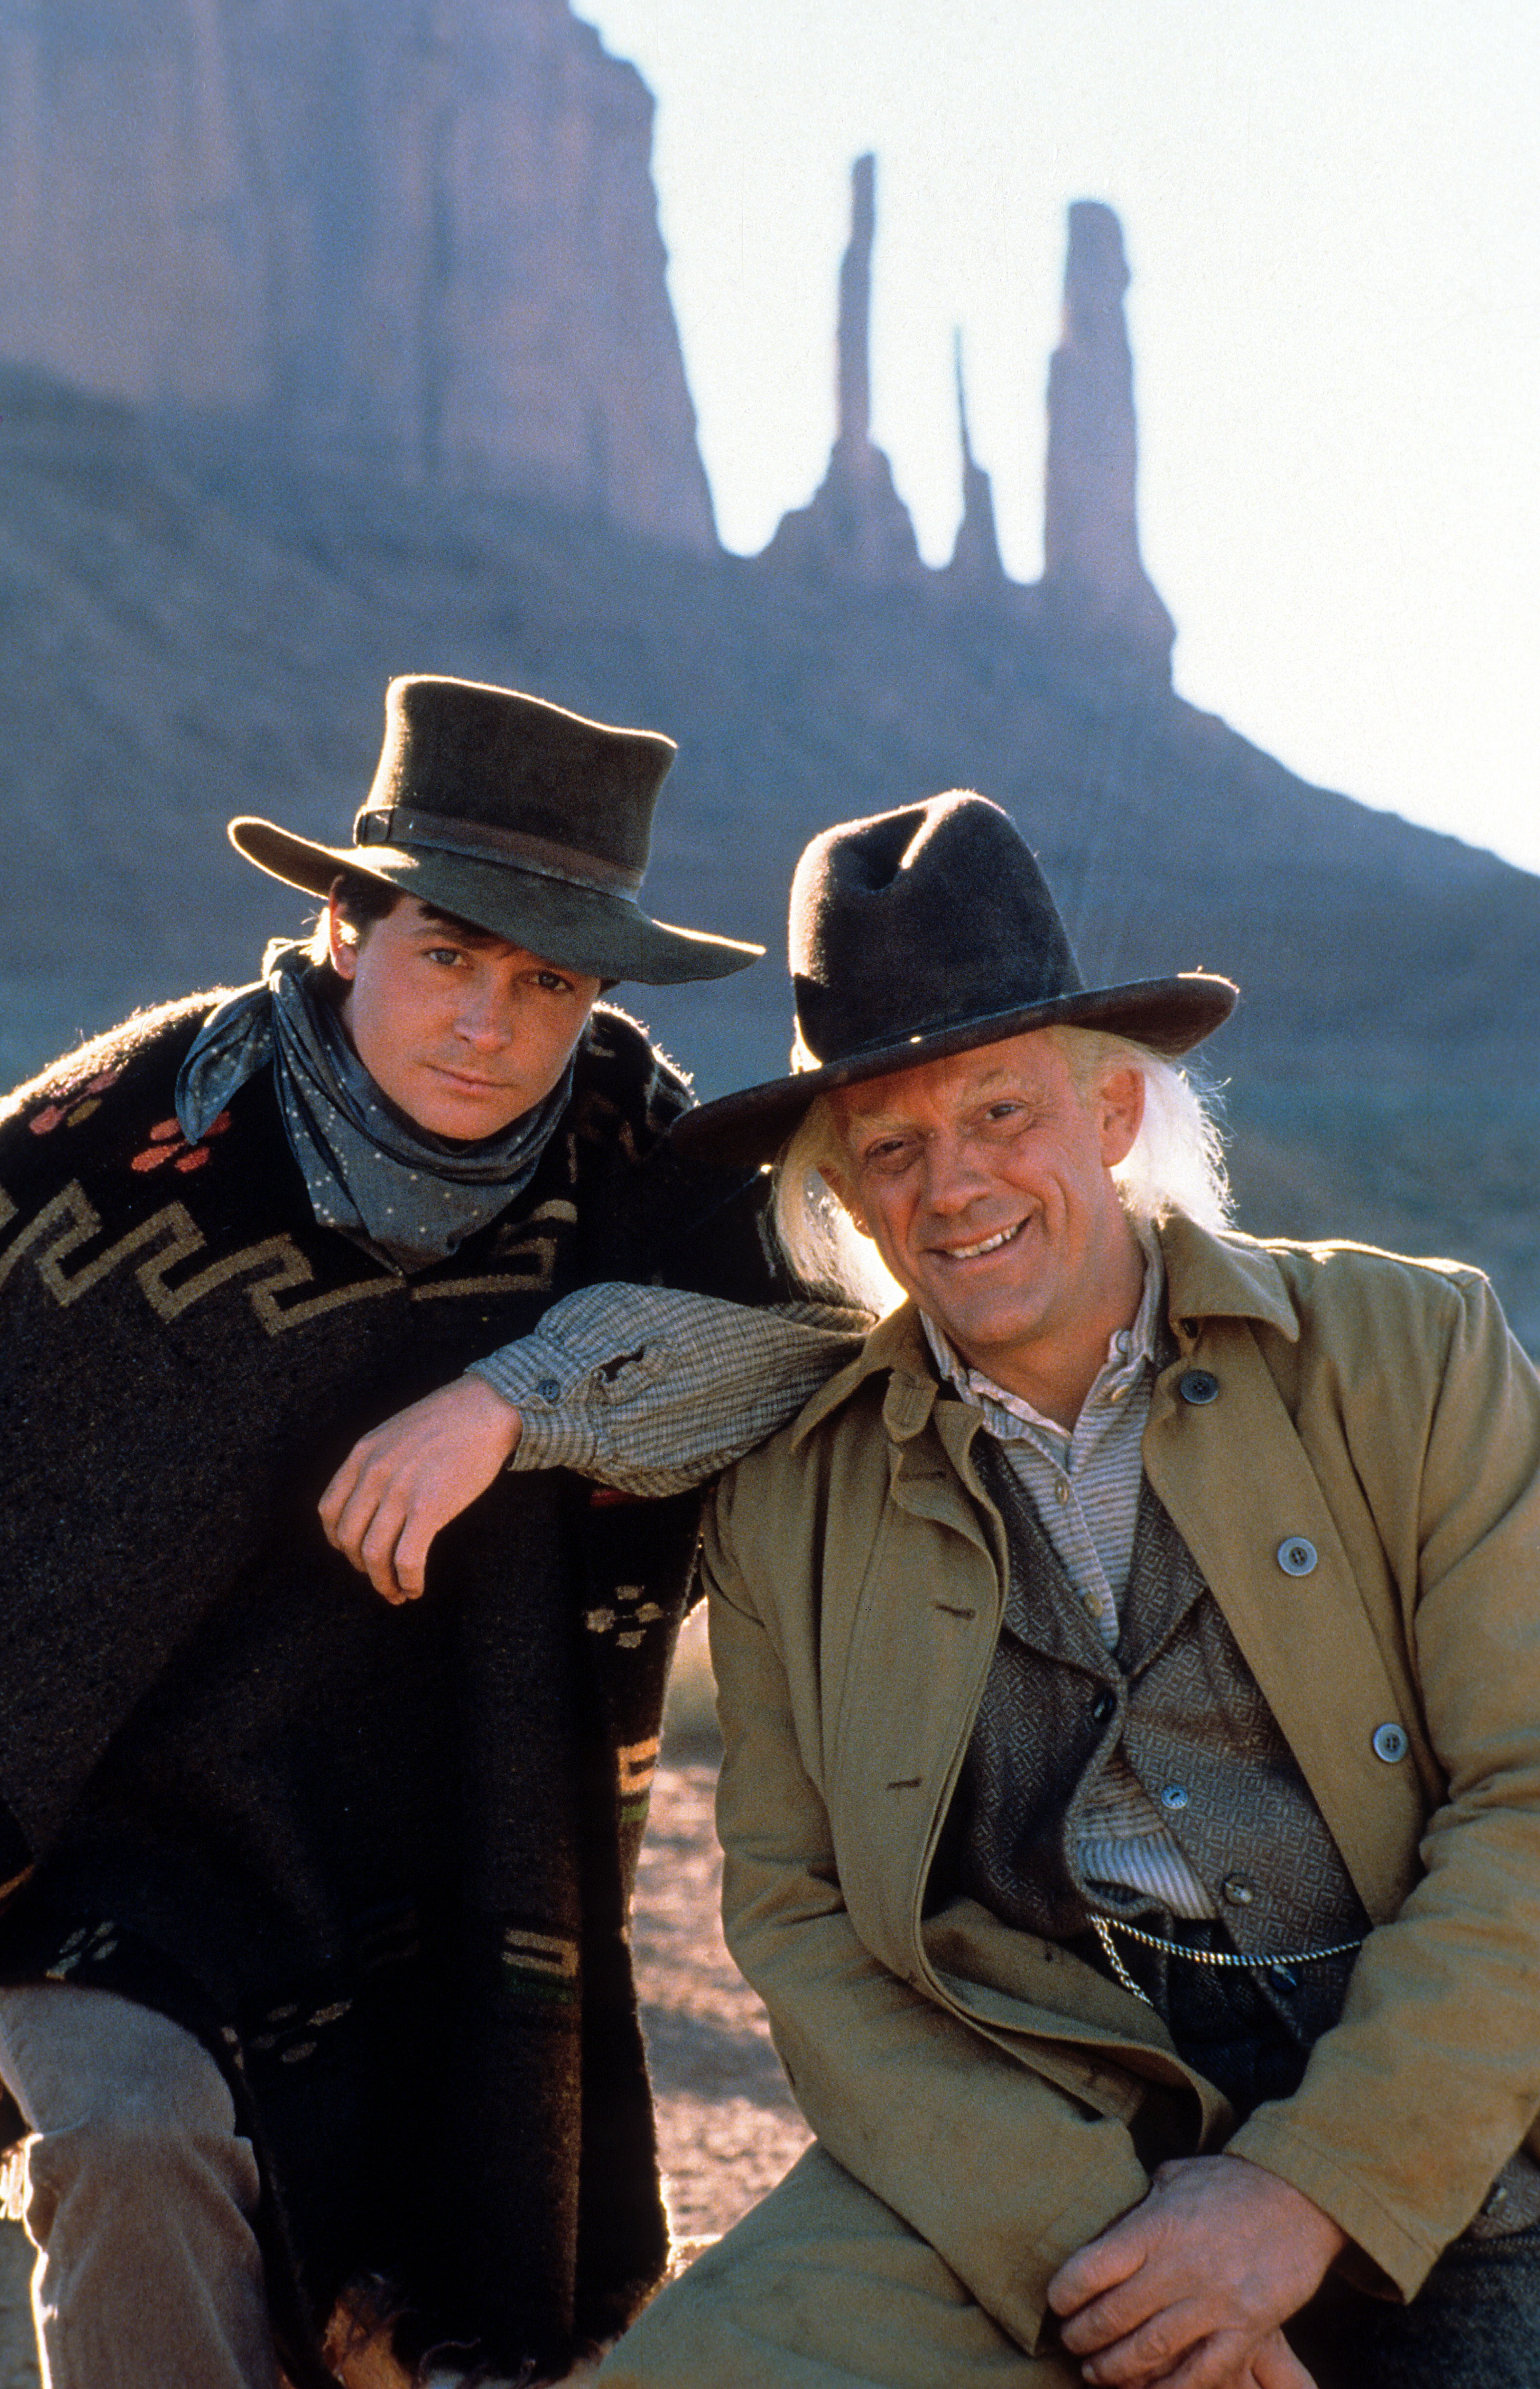 Michael J. Fox and Christopher Lloyd in Back to the Future Part III (1990)